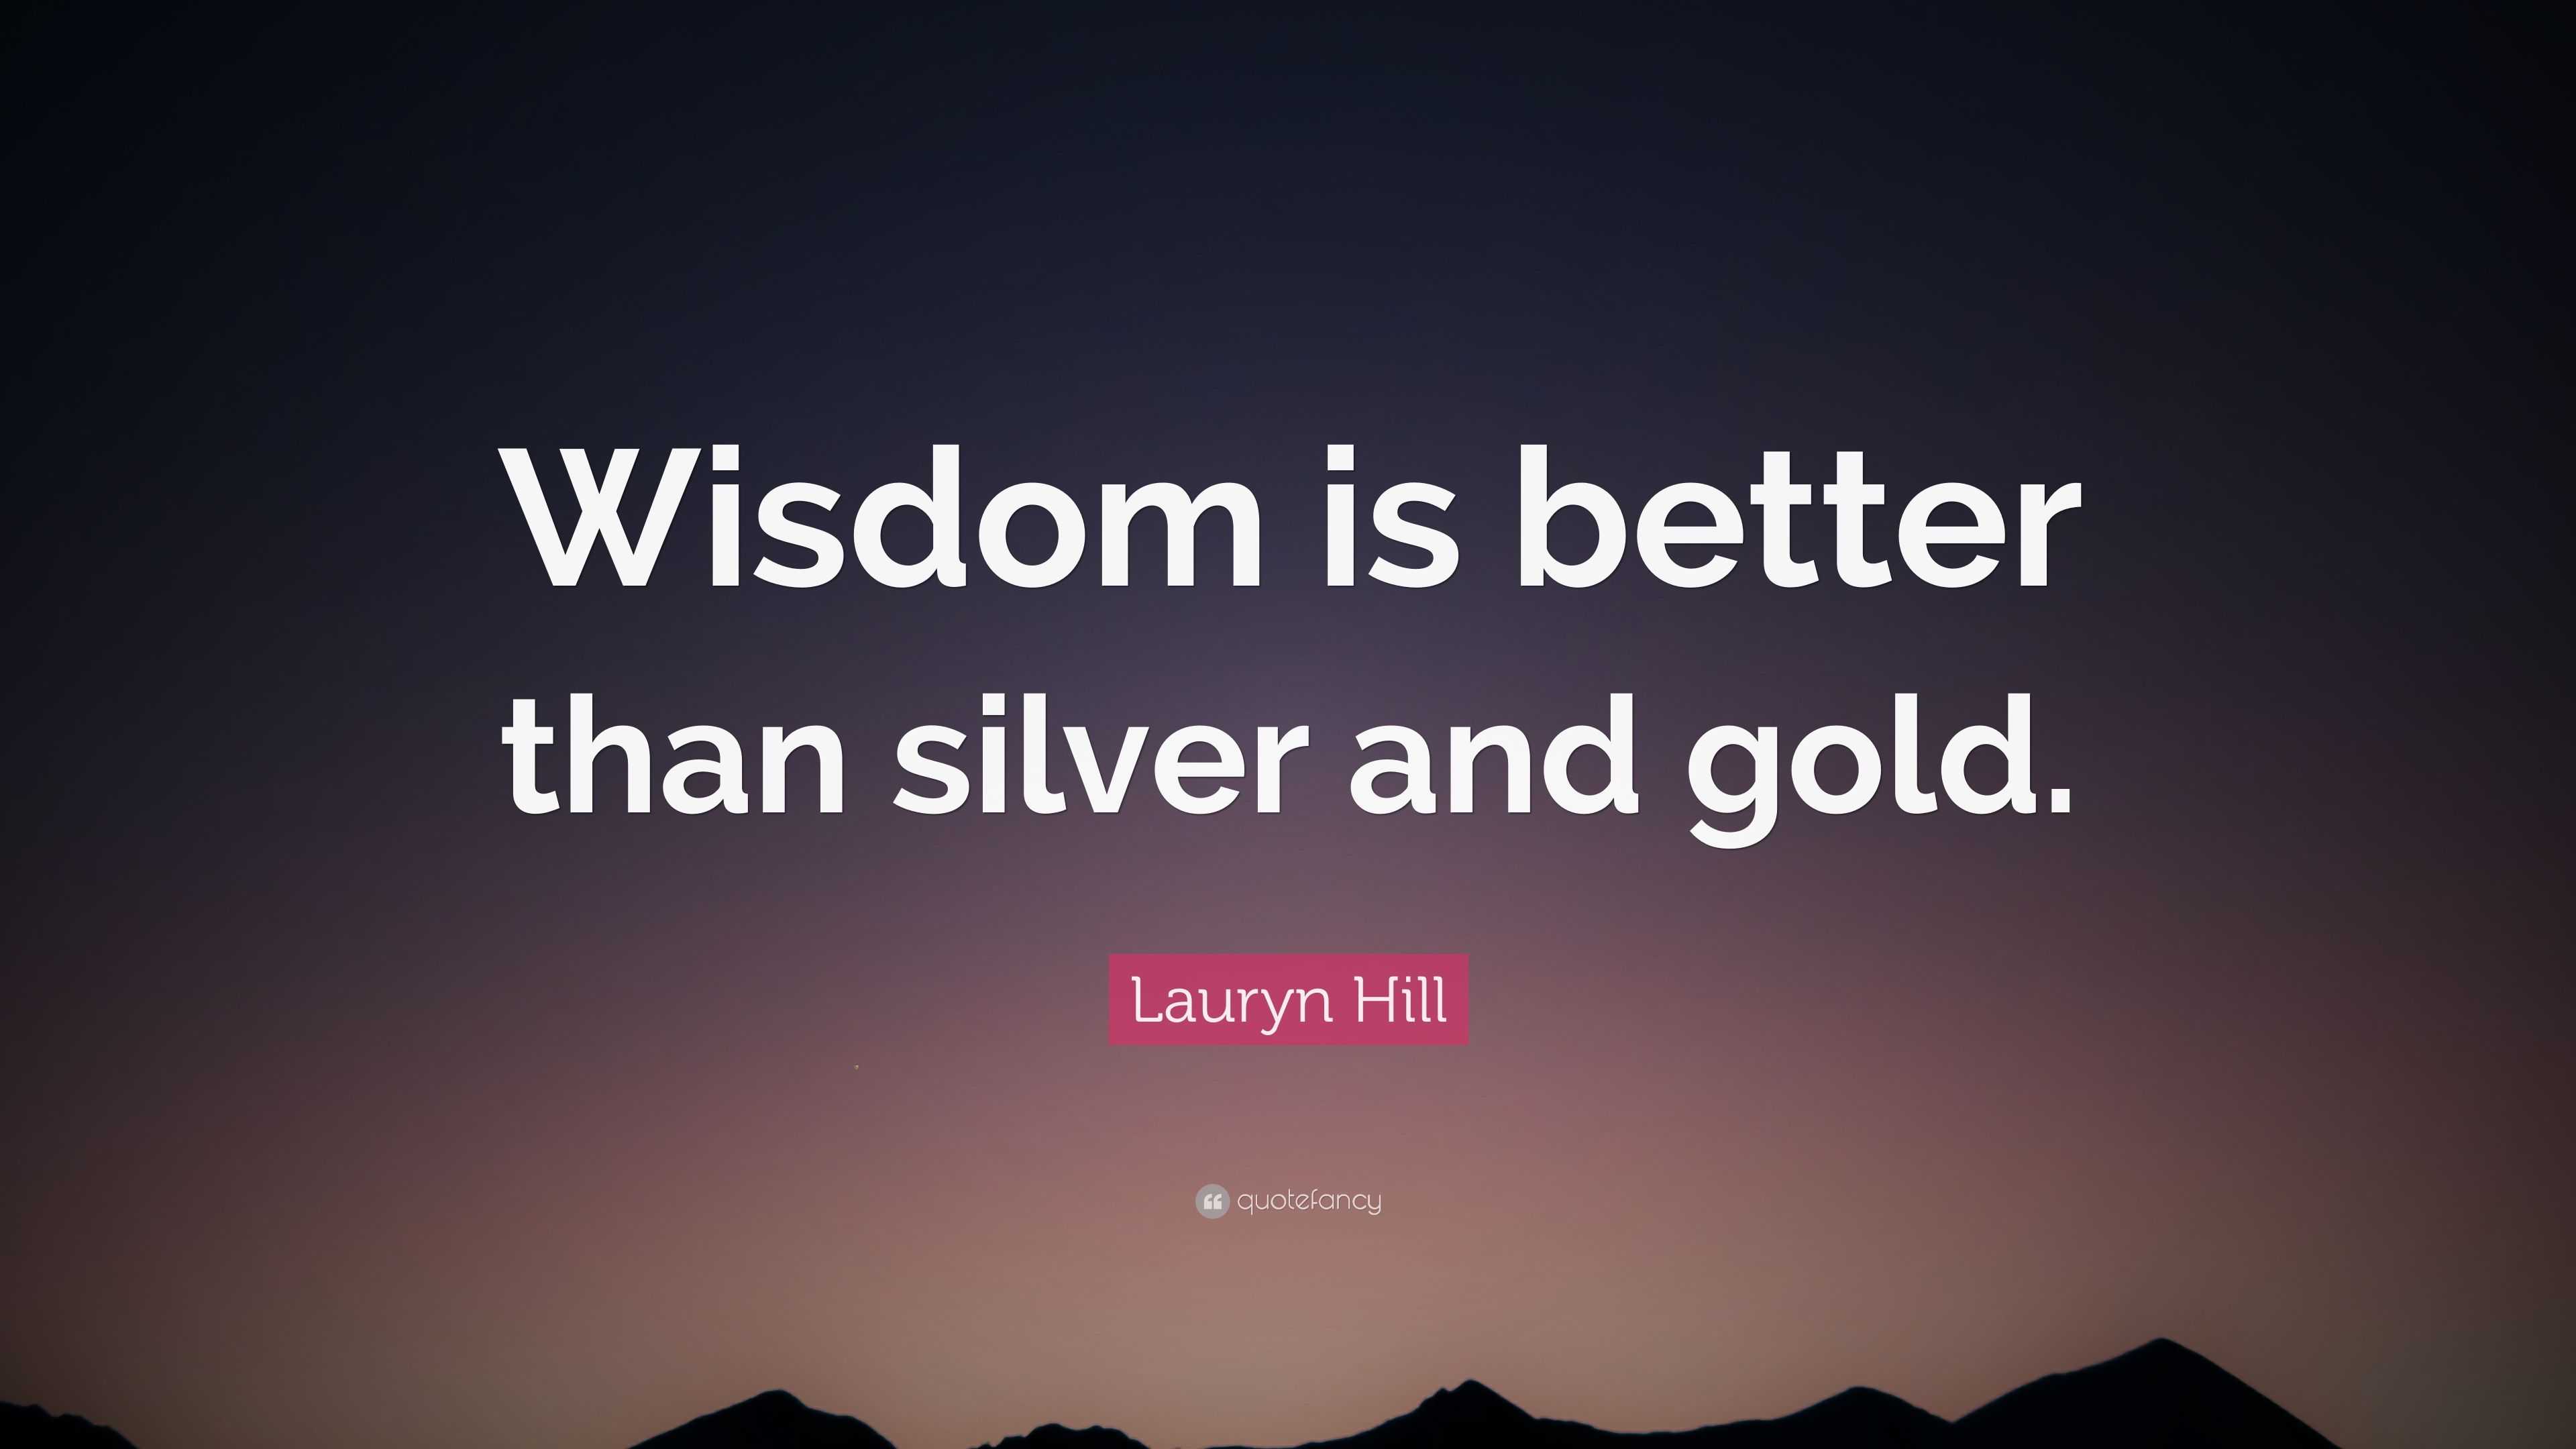 Wisdom Is Better Than Gold